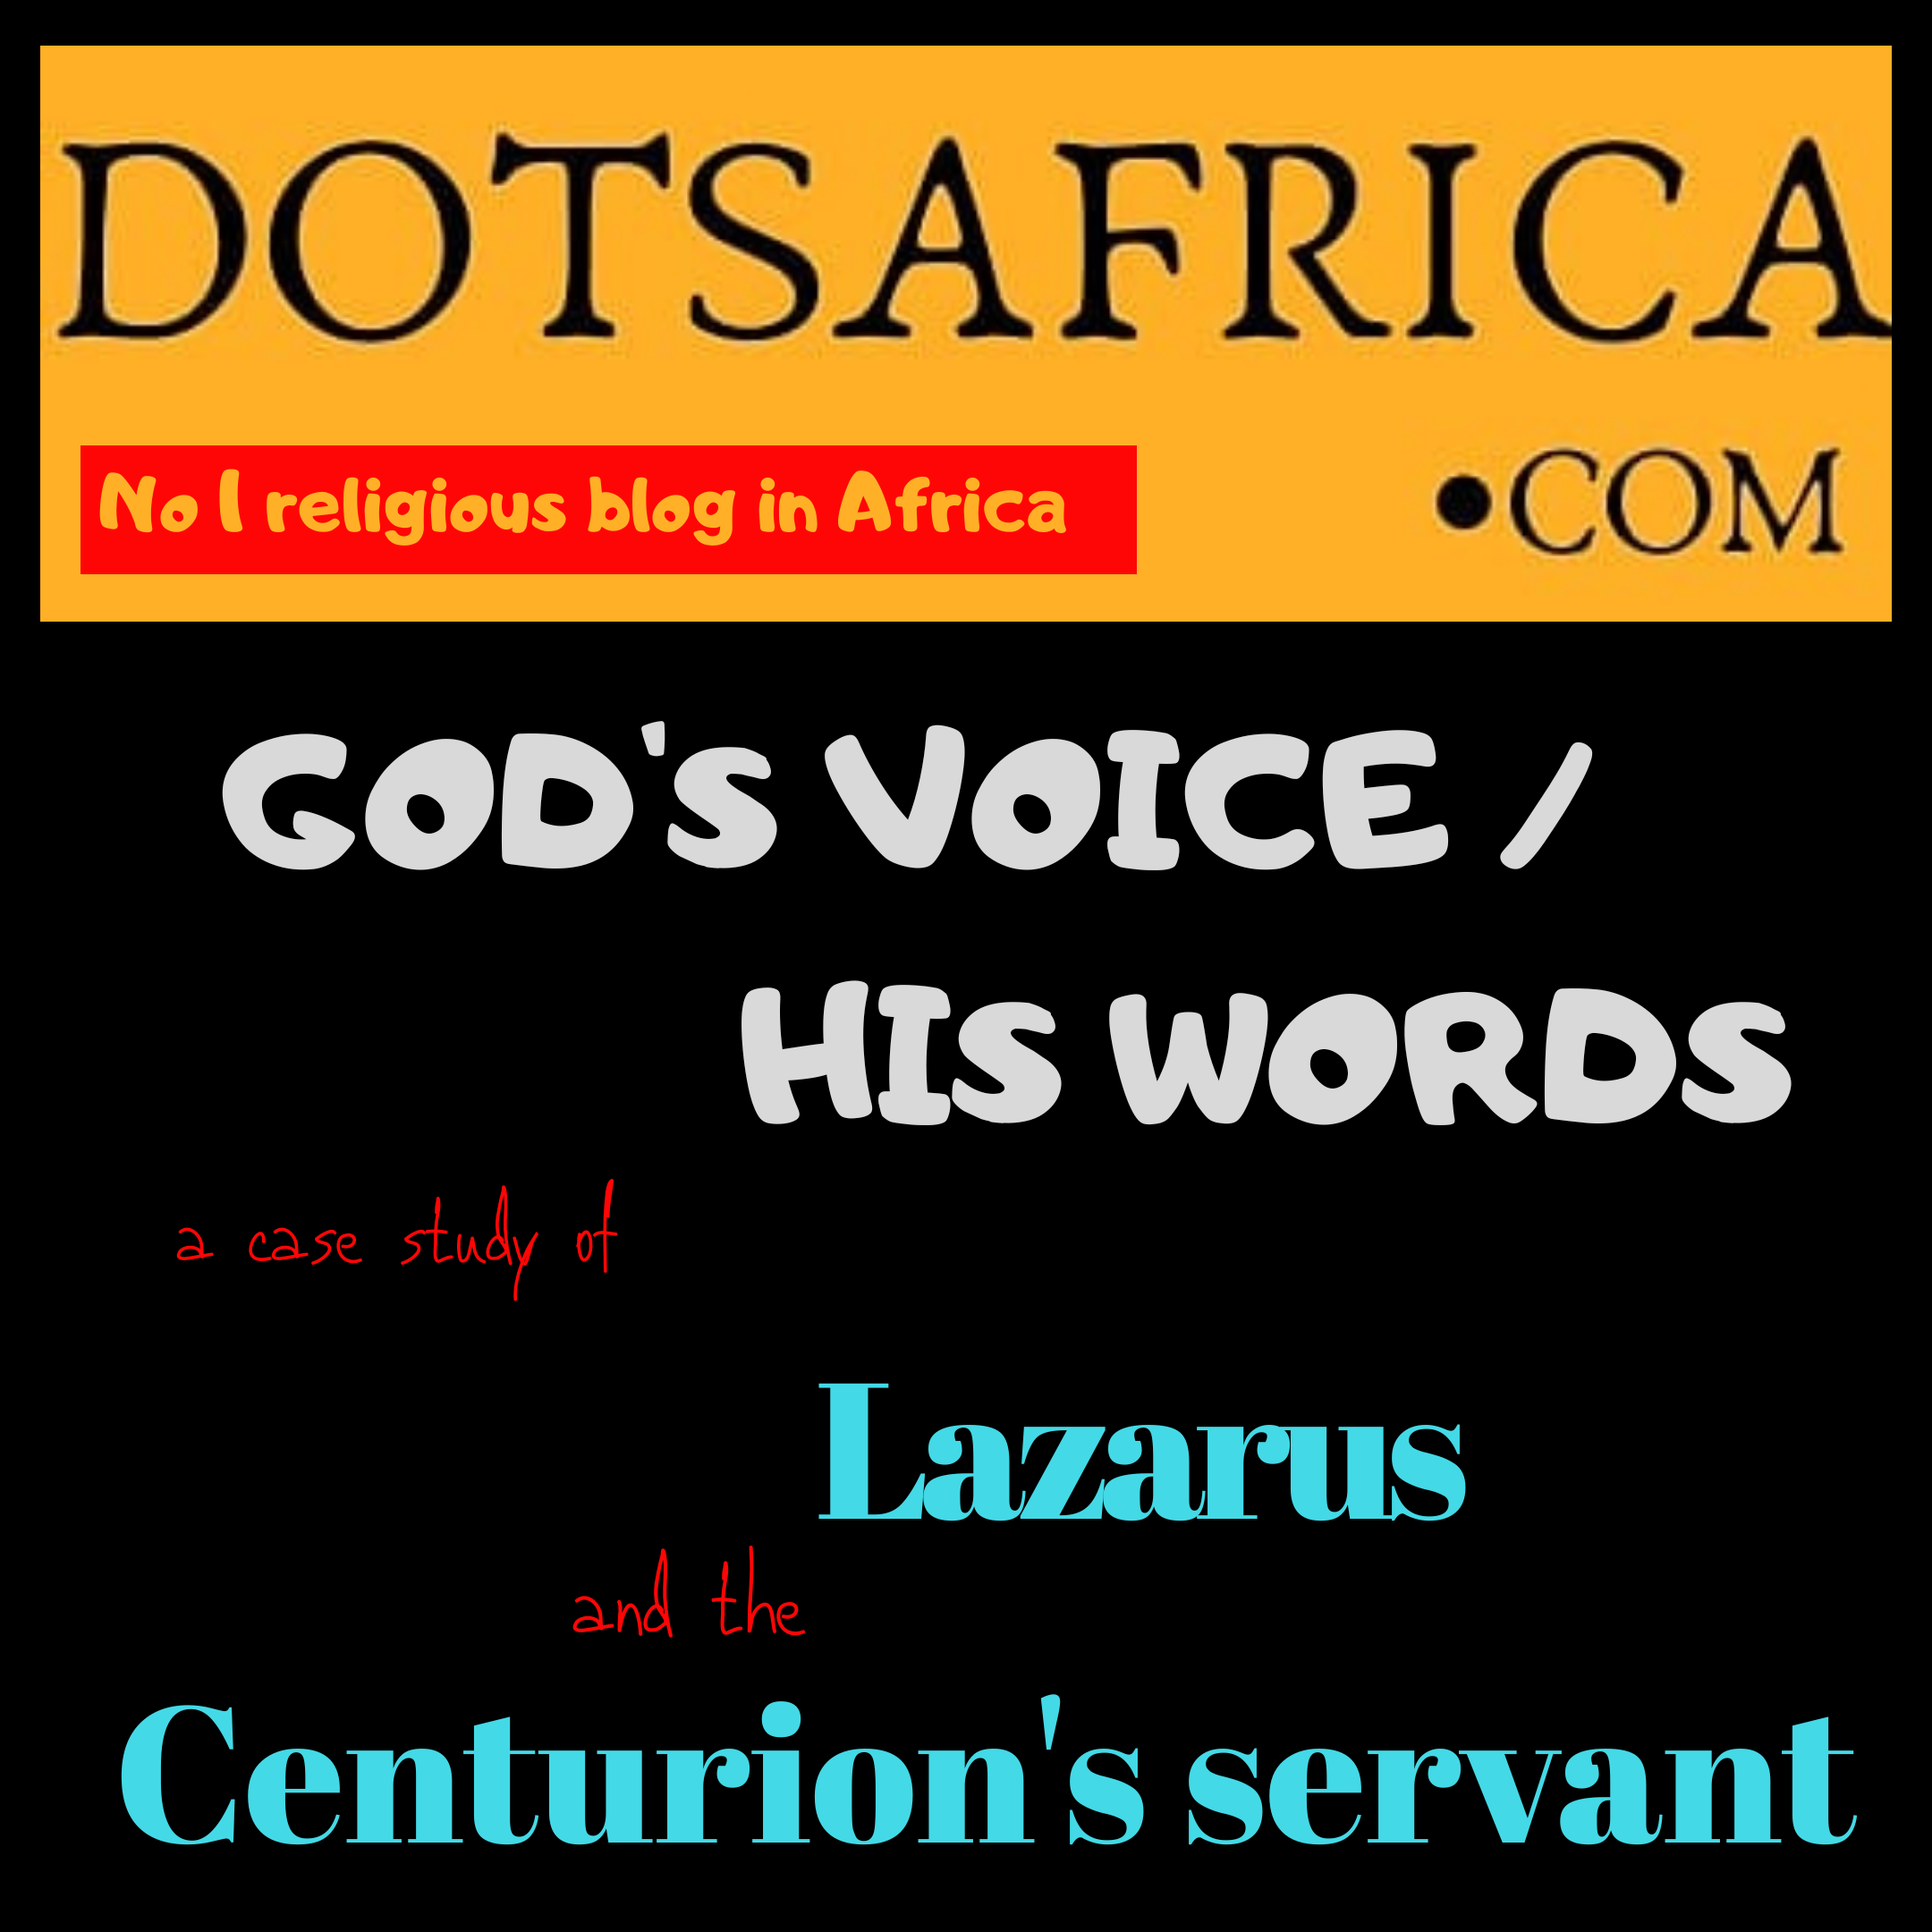 God's words and voice. A case study of Lazarus and the Centurion's servant.